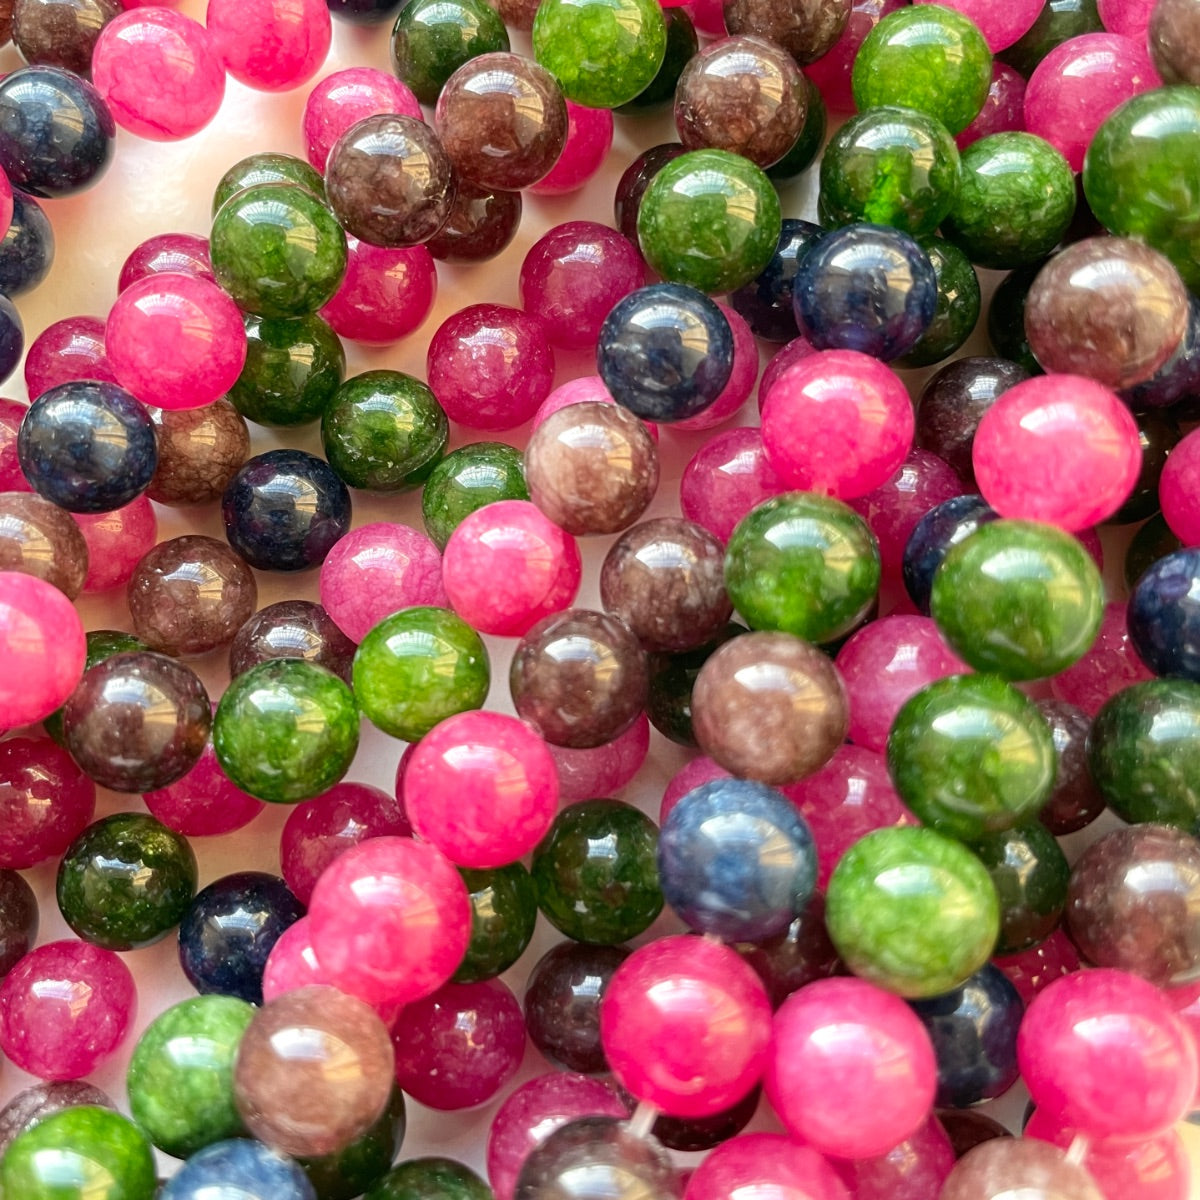 2 Strands/lot 10 Multicolor Hot Pink Brown Blue Green Chalcedony Jade Round Stone Beads Stone Beads New Beads Arrivals Other Stone Beads Charms Beads Beyond